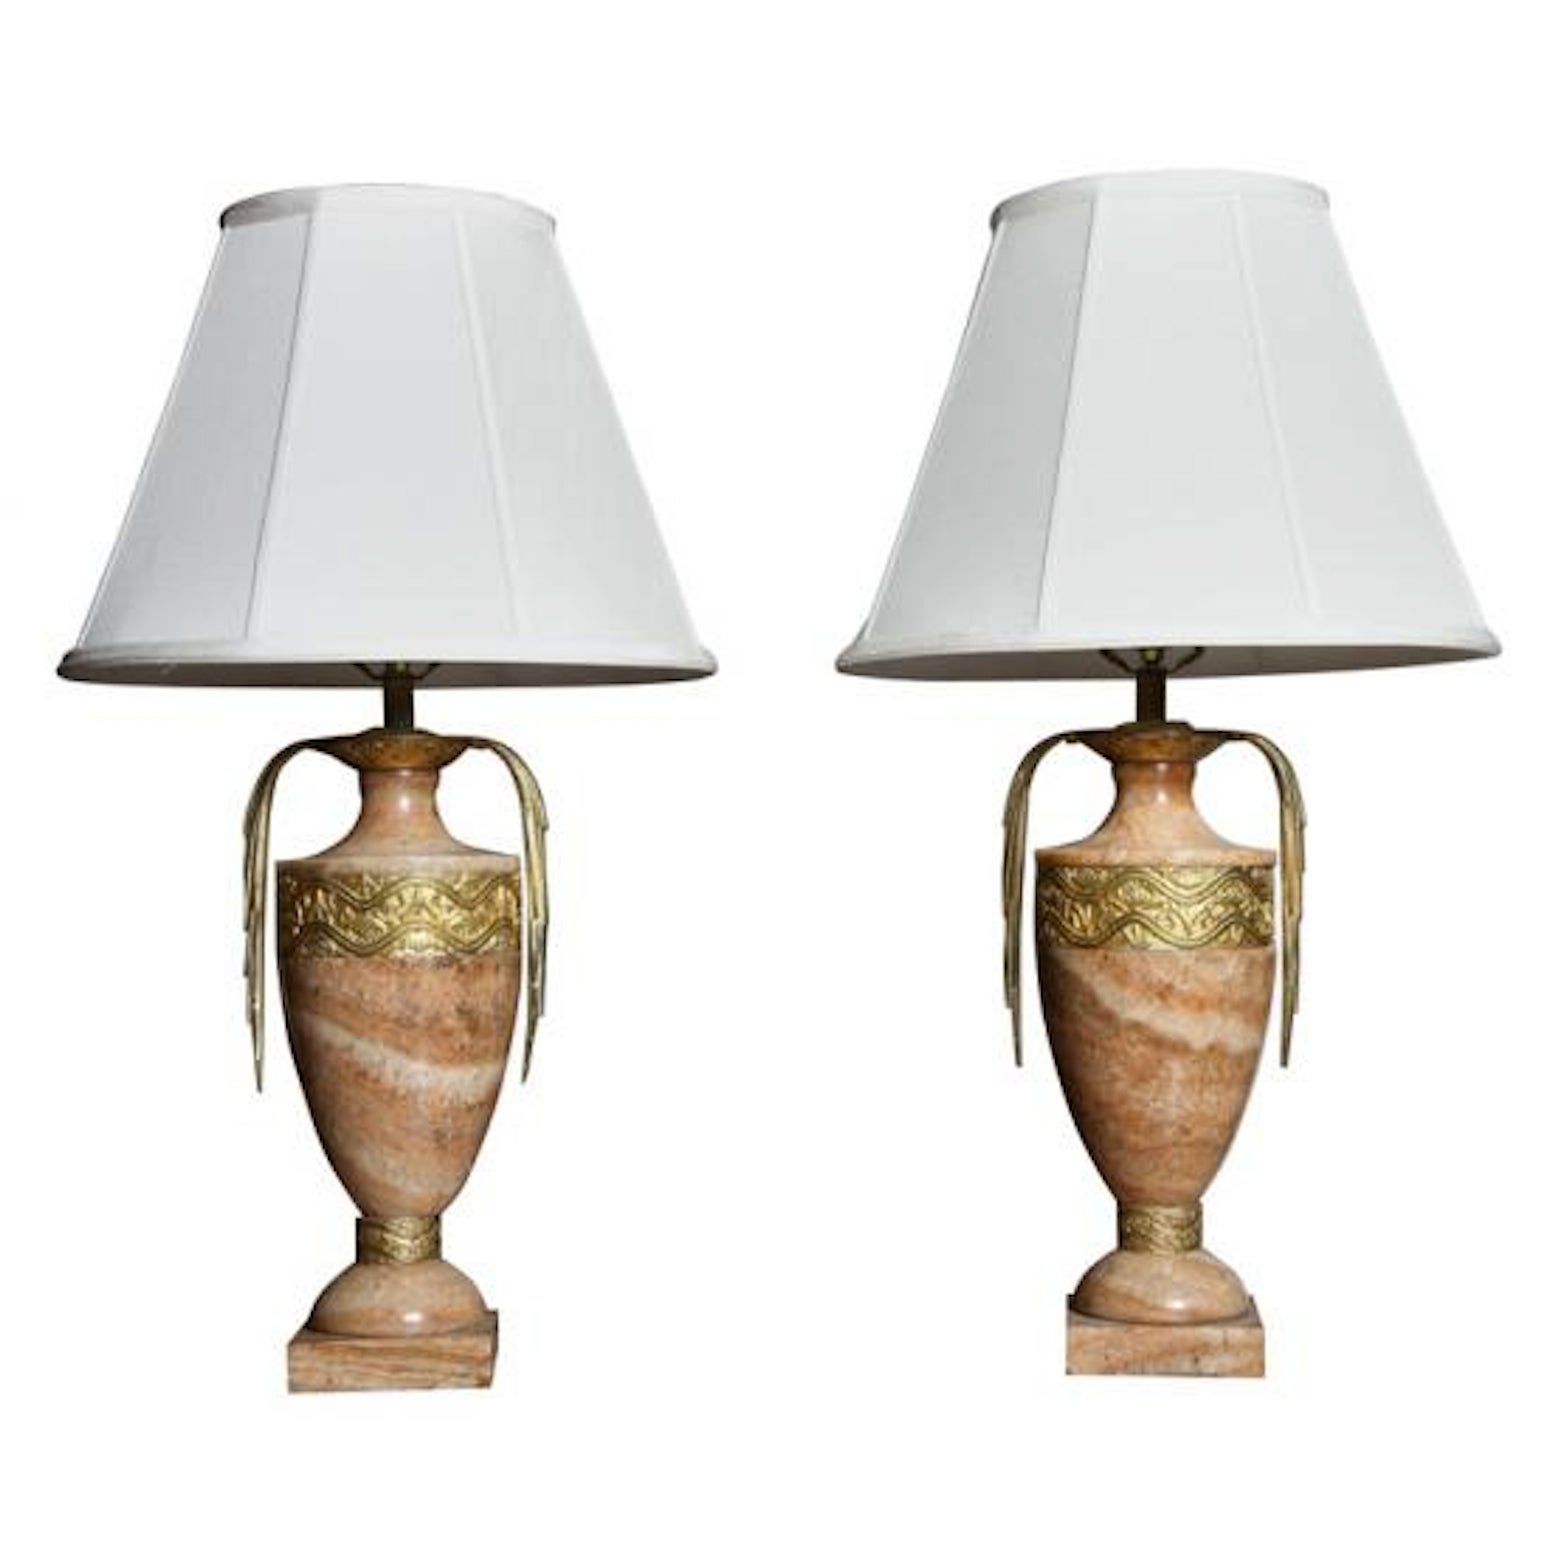 Tycoon's Art Deco Onyx Urn Table Lamps with Gilt Bronze Decorative Motif Trim For Sale